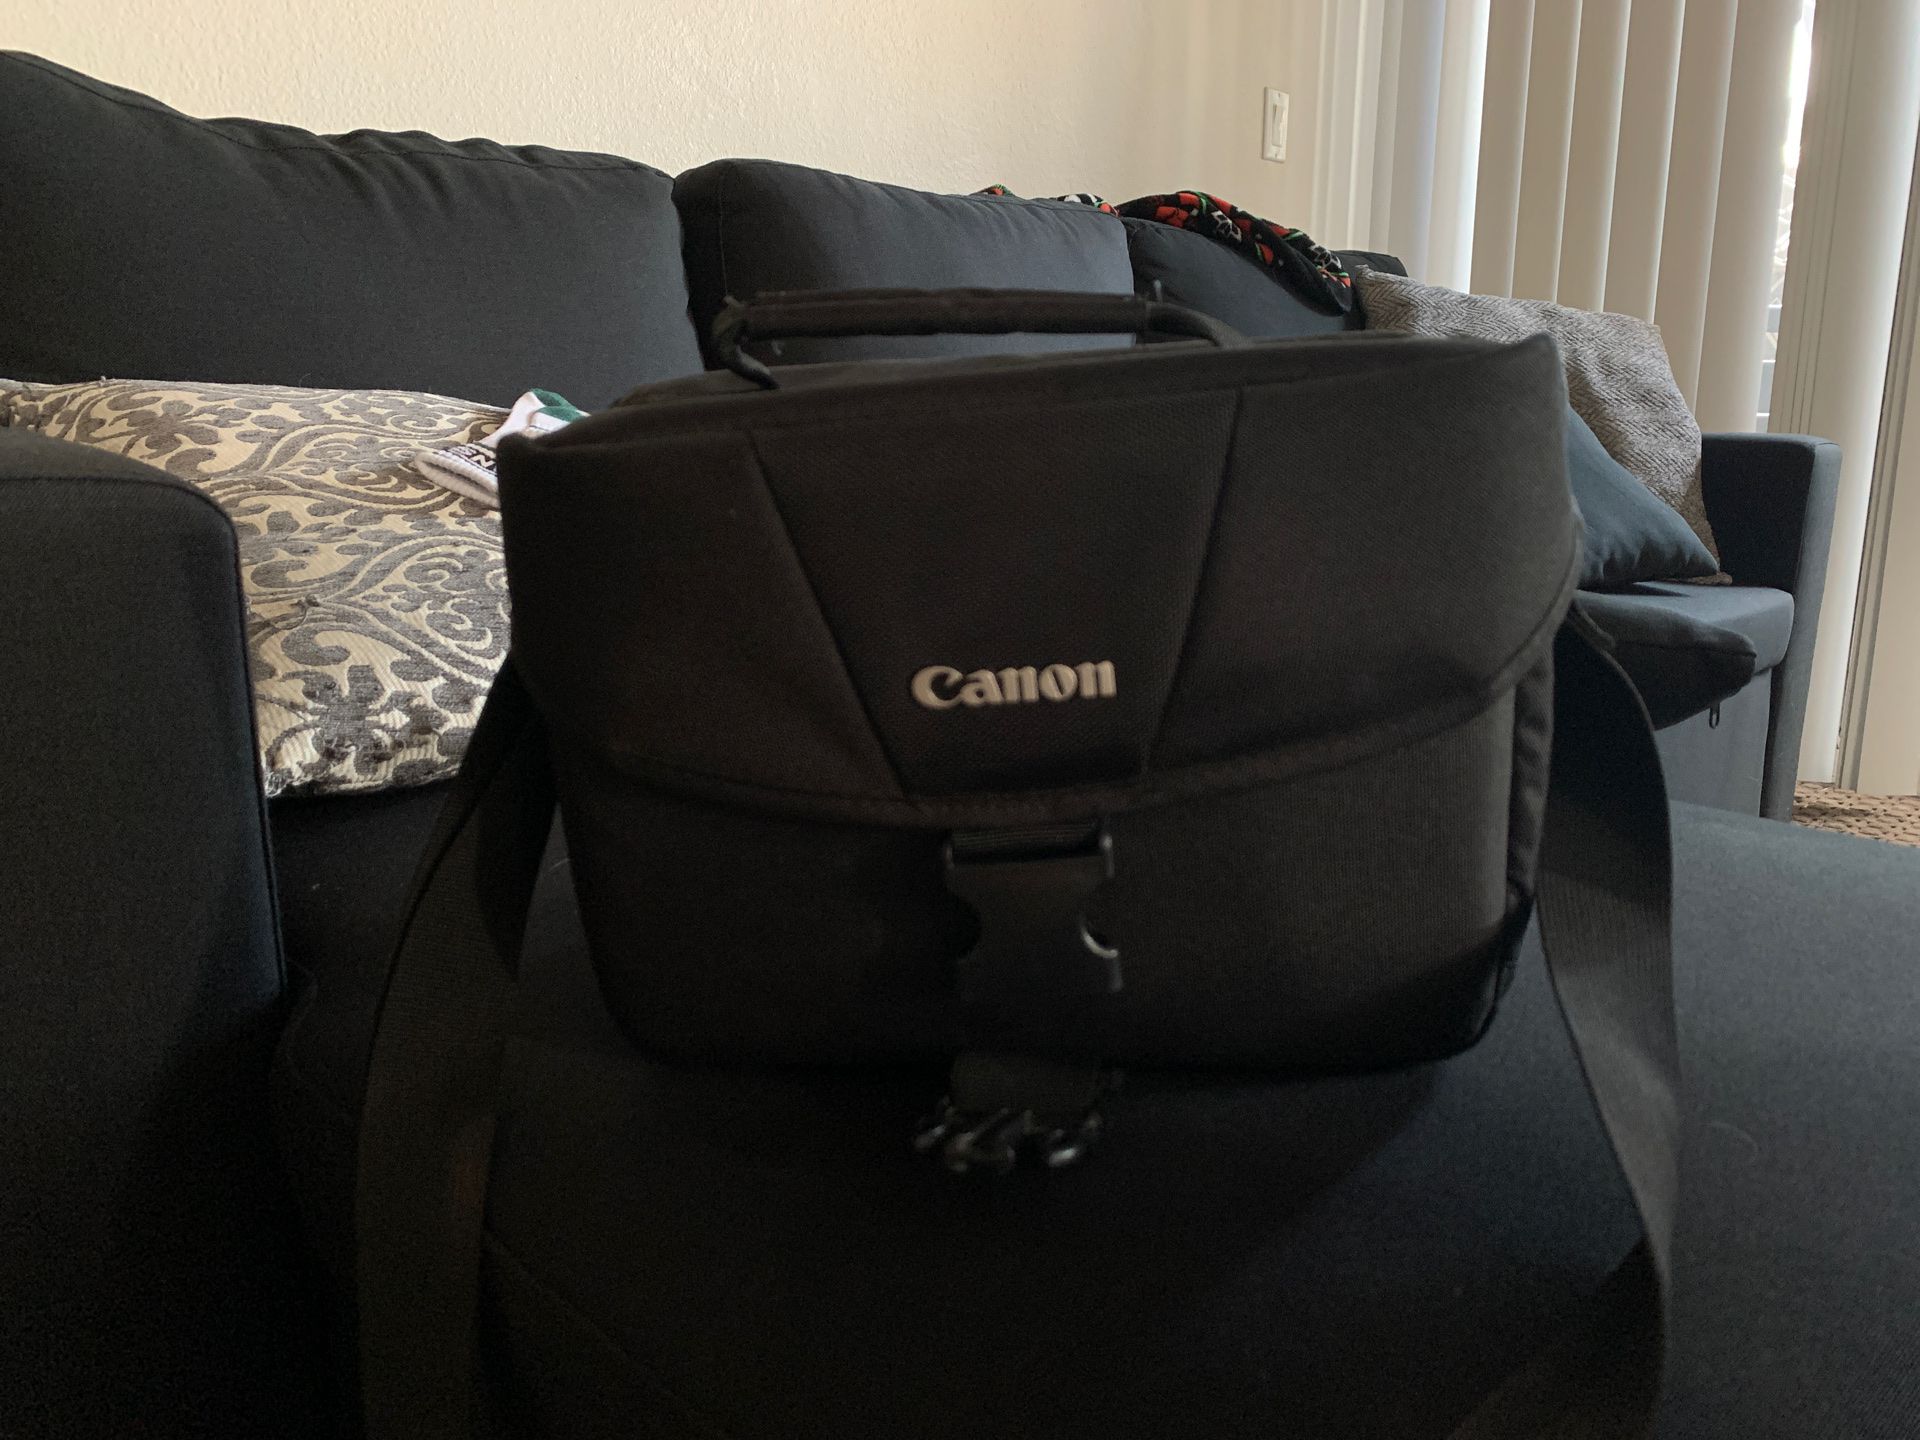 Canon Camera Bag with extra battery, lens supplies and mini tripod